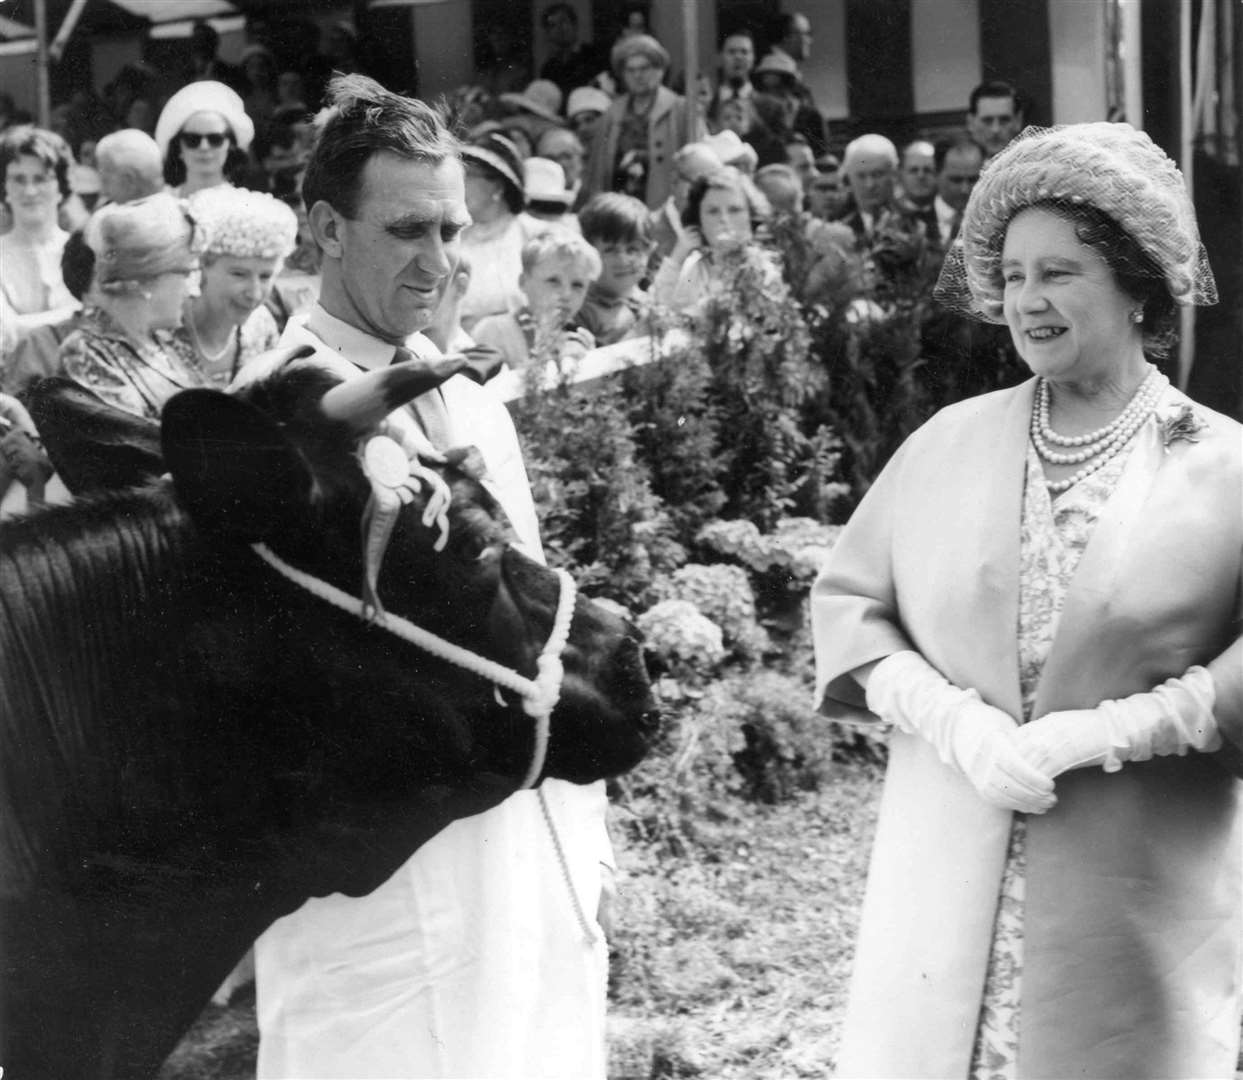 The Tunbridge Wells Agricultural Show celebrated its centenary in July 1962 with a visit by the Queen Mother, who is seen admiring the champion dairy female after presenting the prizes. She had paid her first visit to the Tunbridge Wells show 30 years earlier